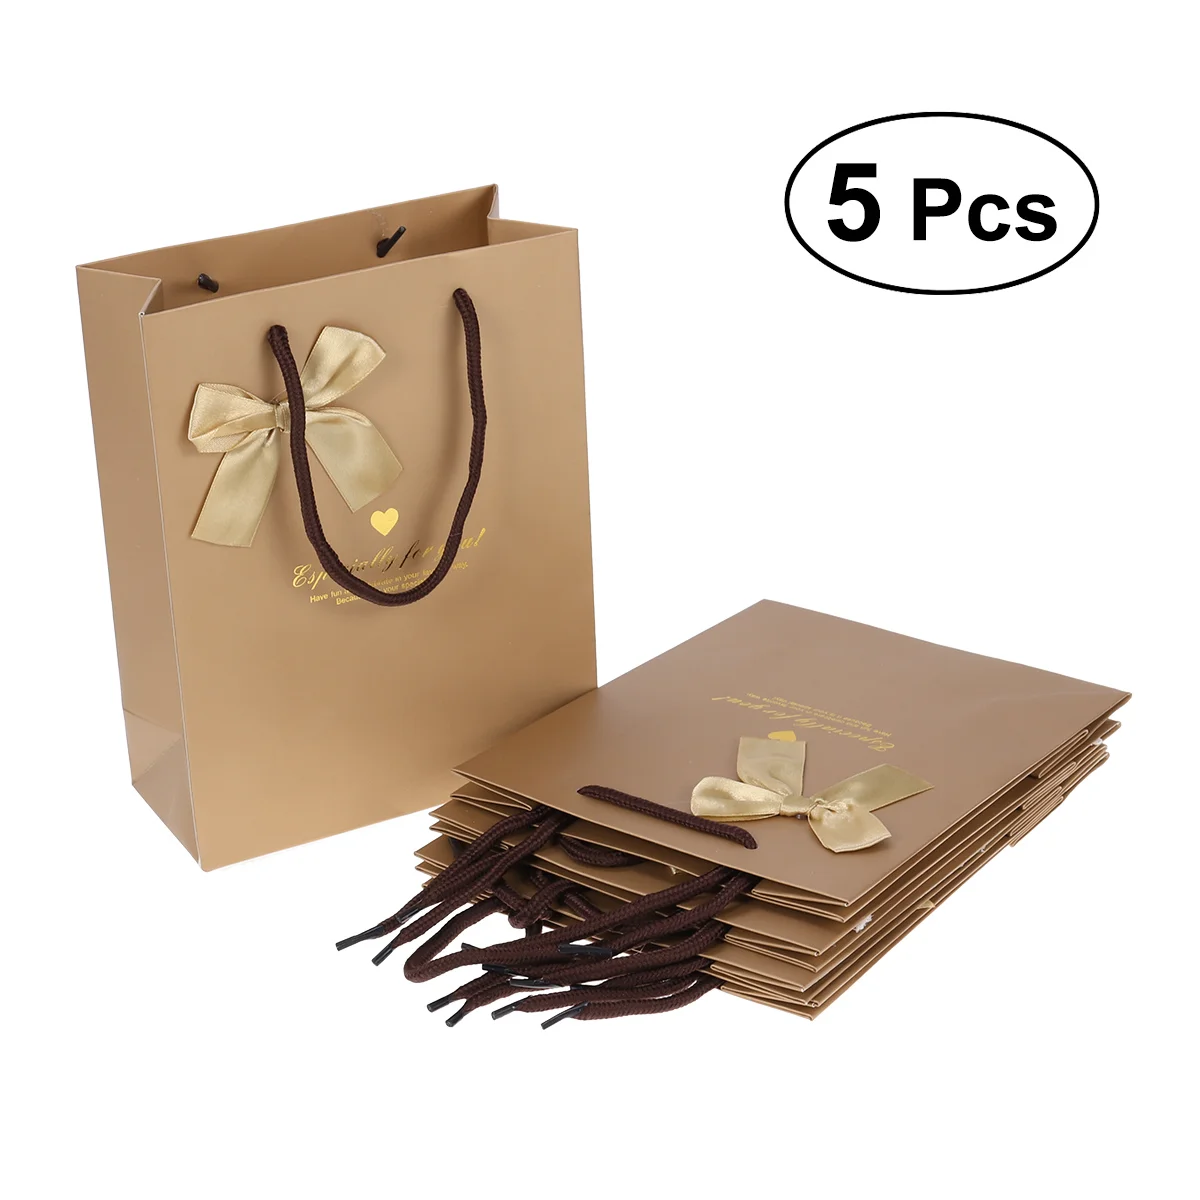 

5PCS Shopping Bags for Boutique Assorted Gift Bags Cube Paper Bags Retail Bags with Handles Gift Bags Wedding Party Favor Bags